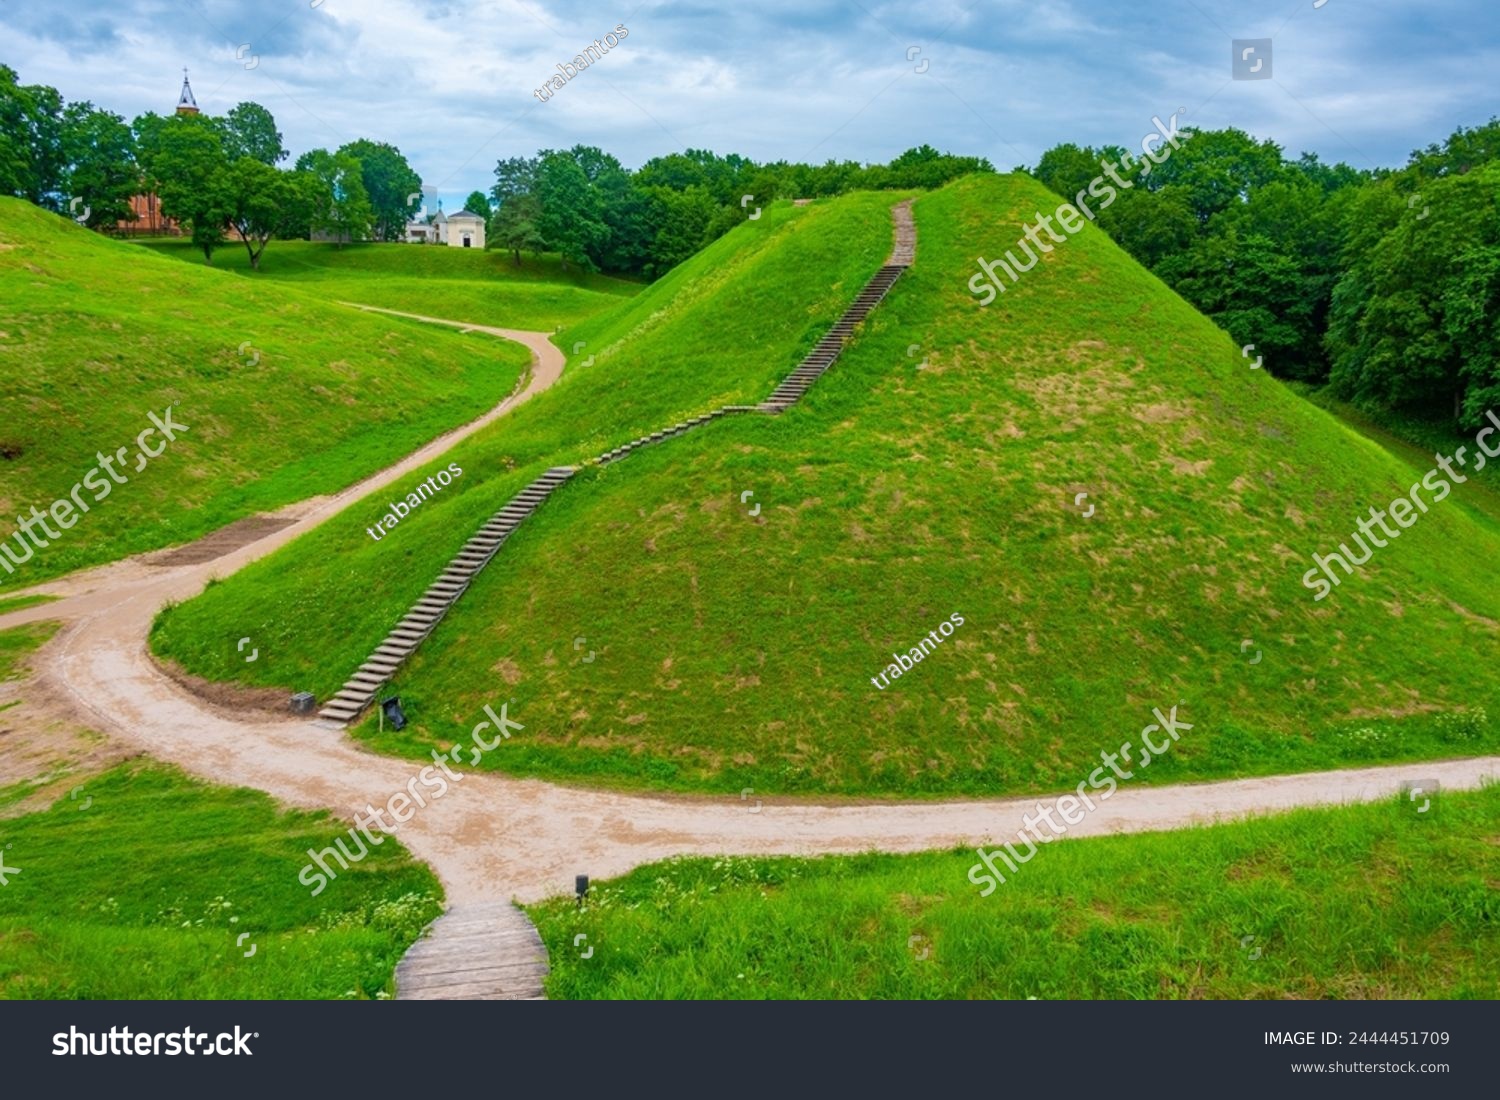 The Hillforts of Kernave, ancient capital of Grand Duchy of Lithuania. #2444451709